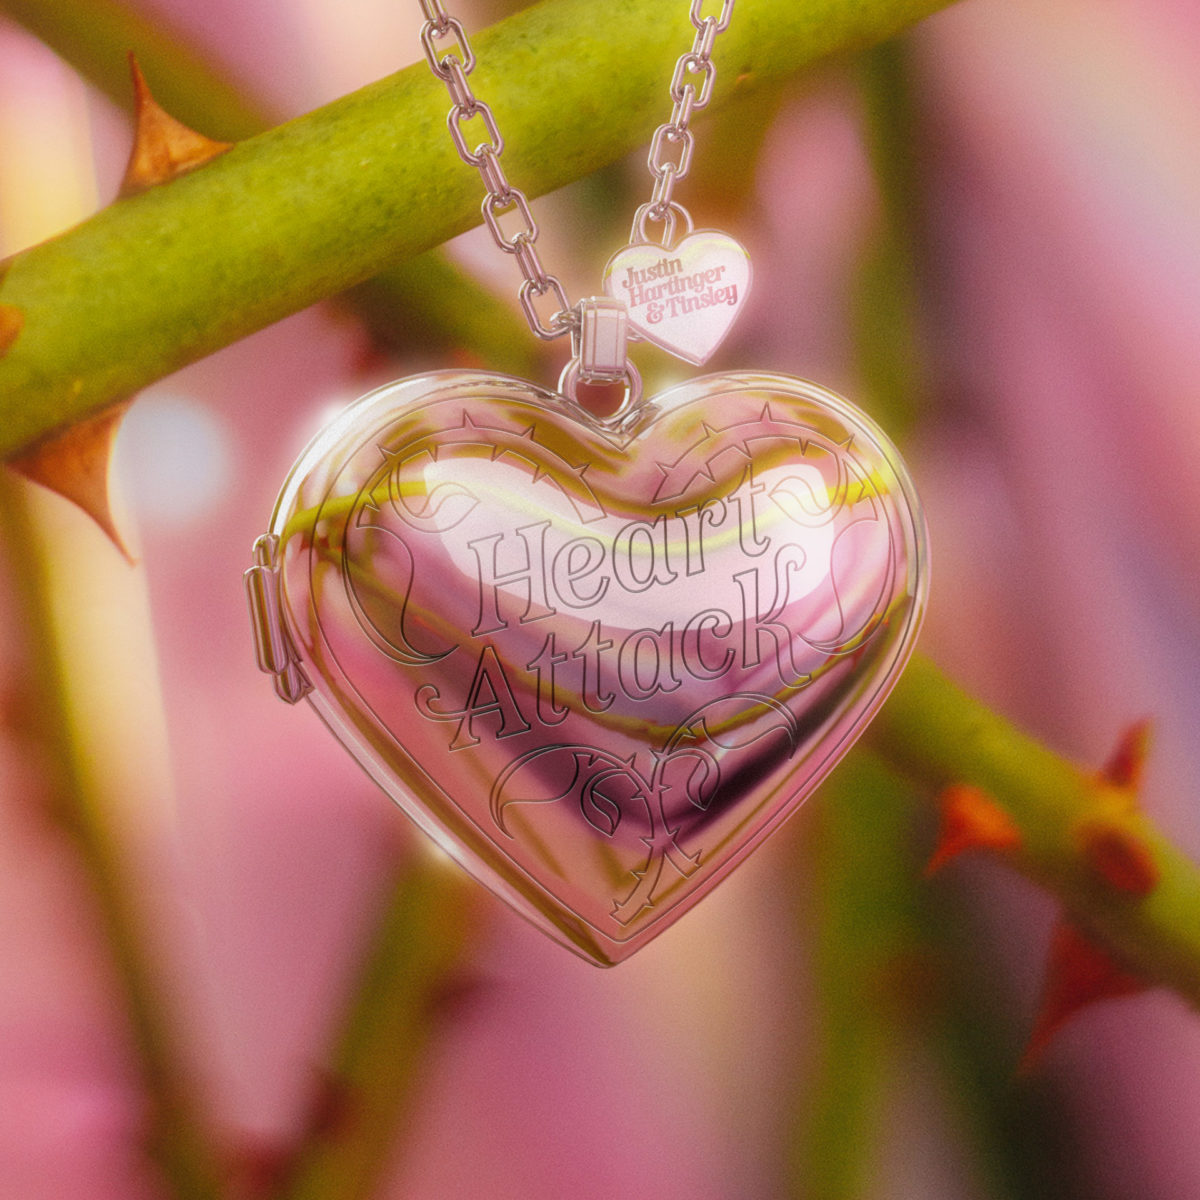 A heart pendant hanging on rose stems with a pink background